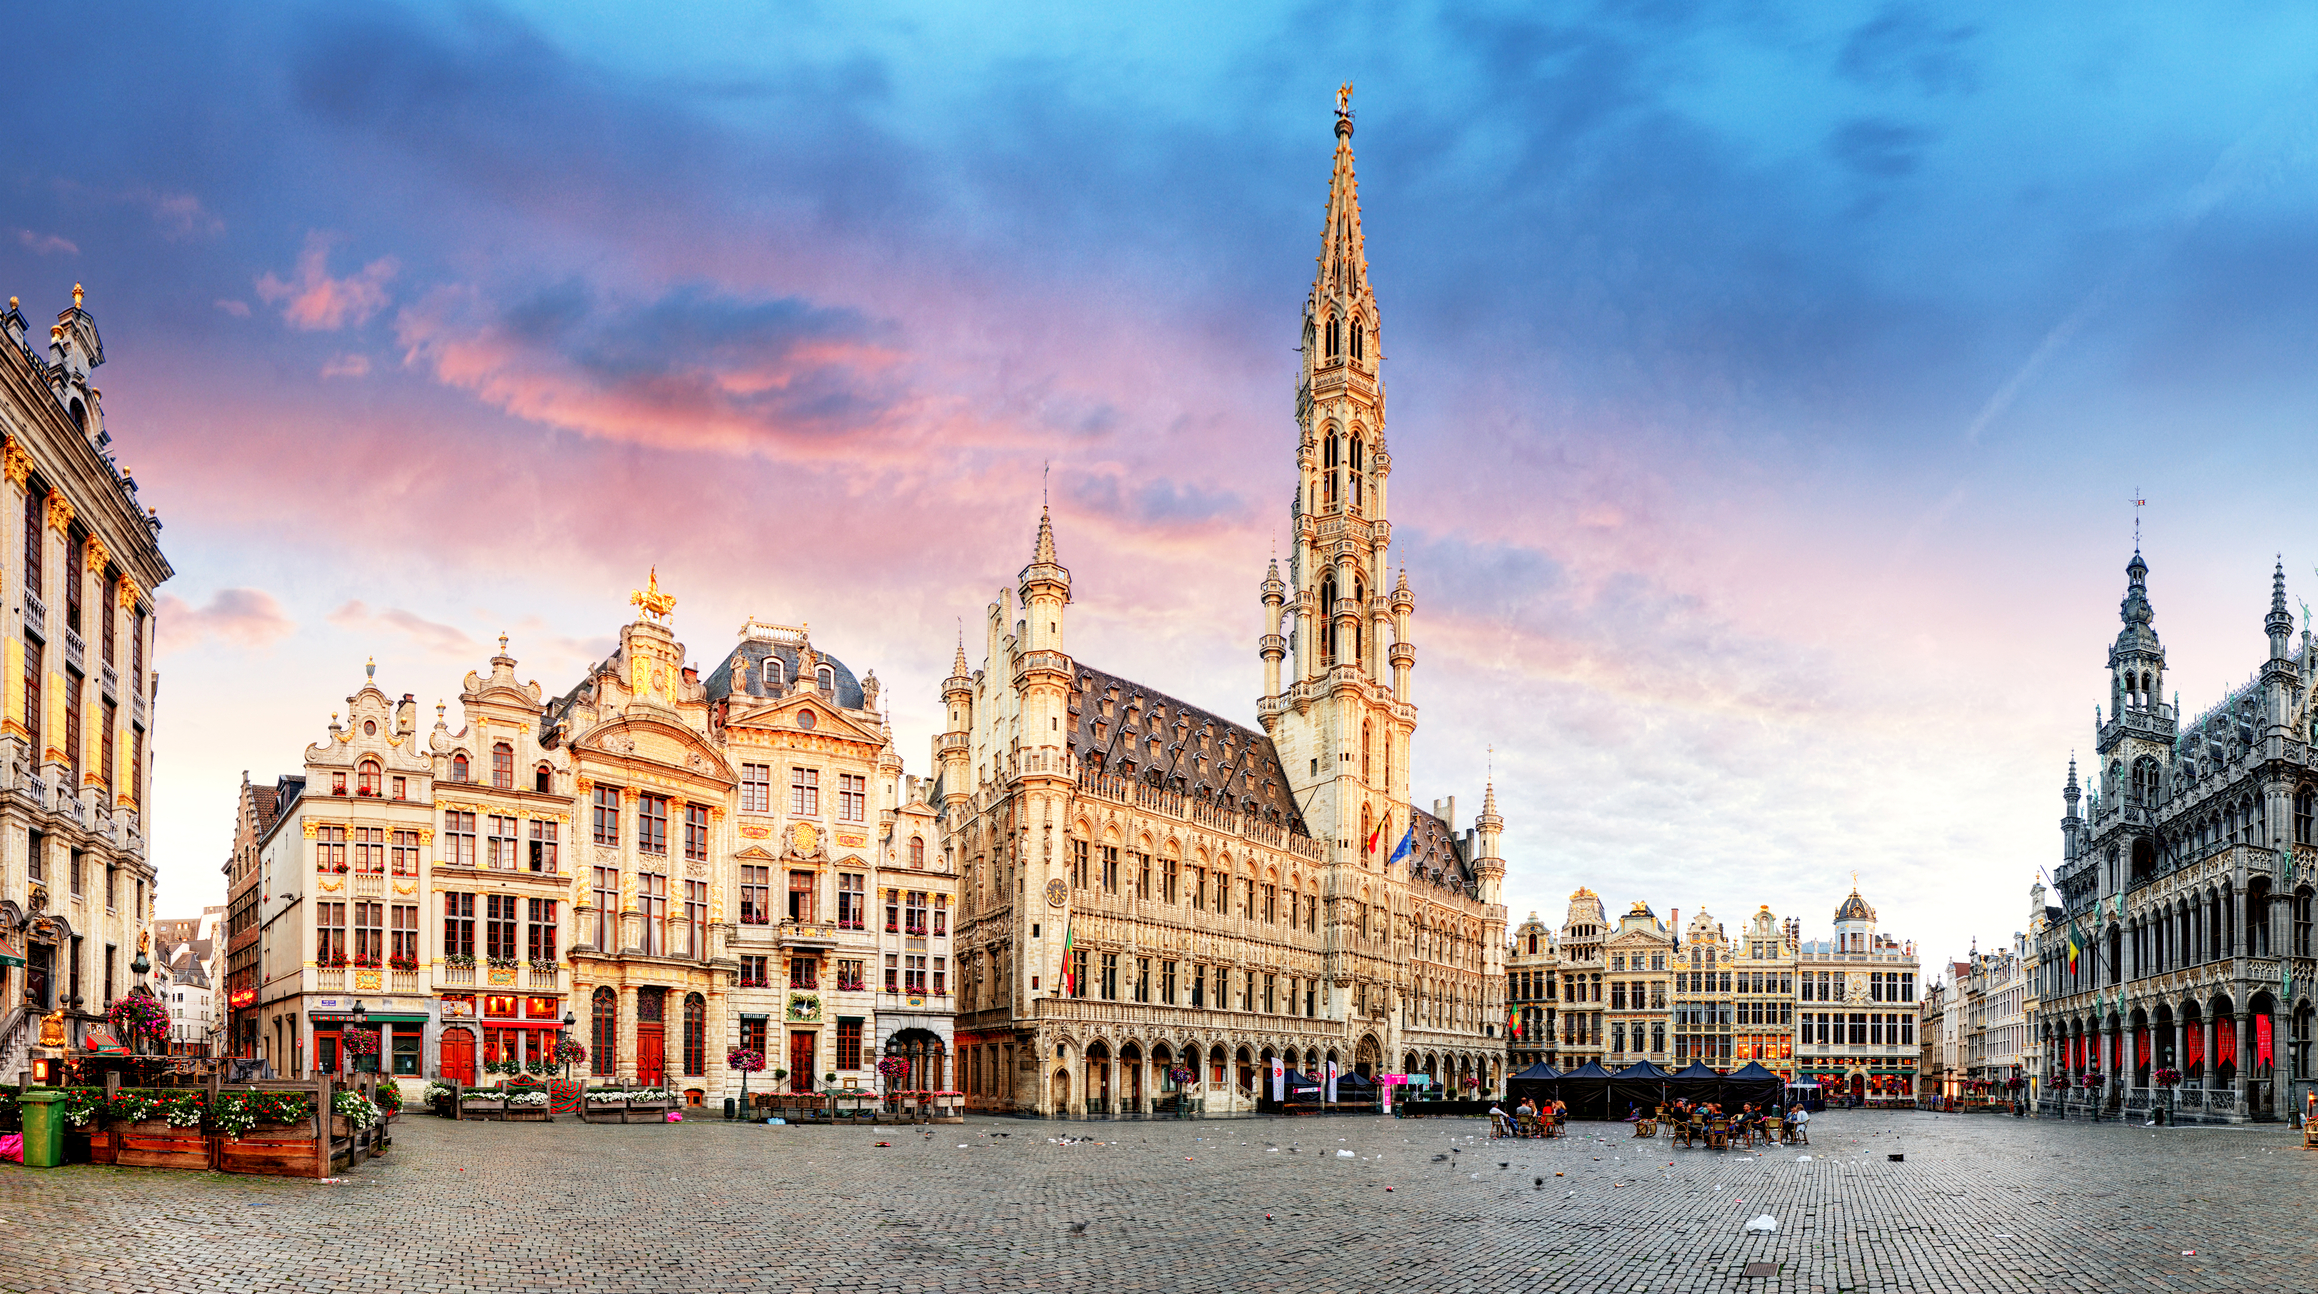 Brussels Travel Guide